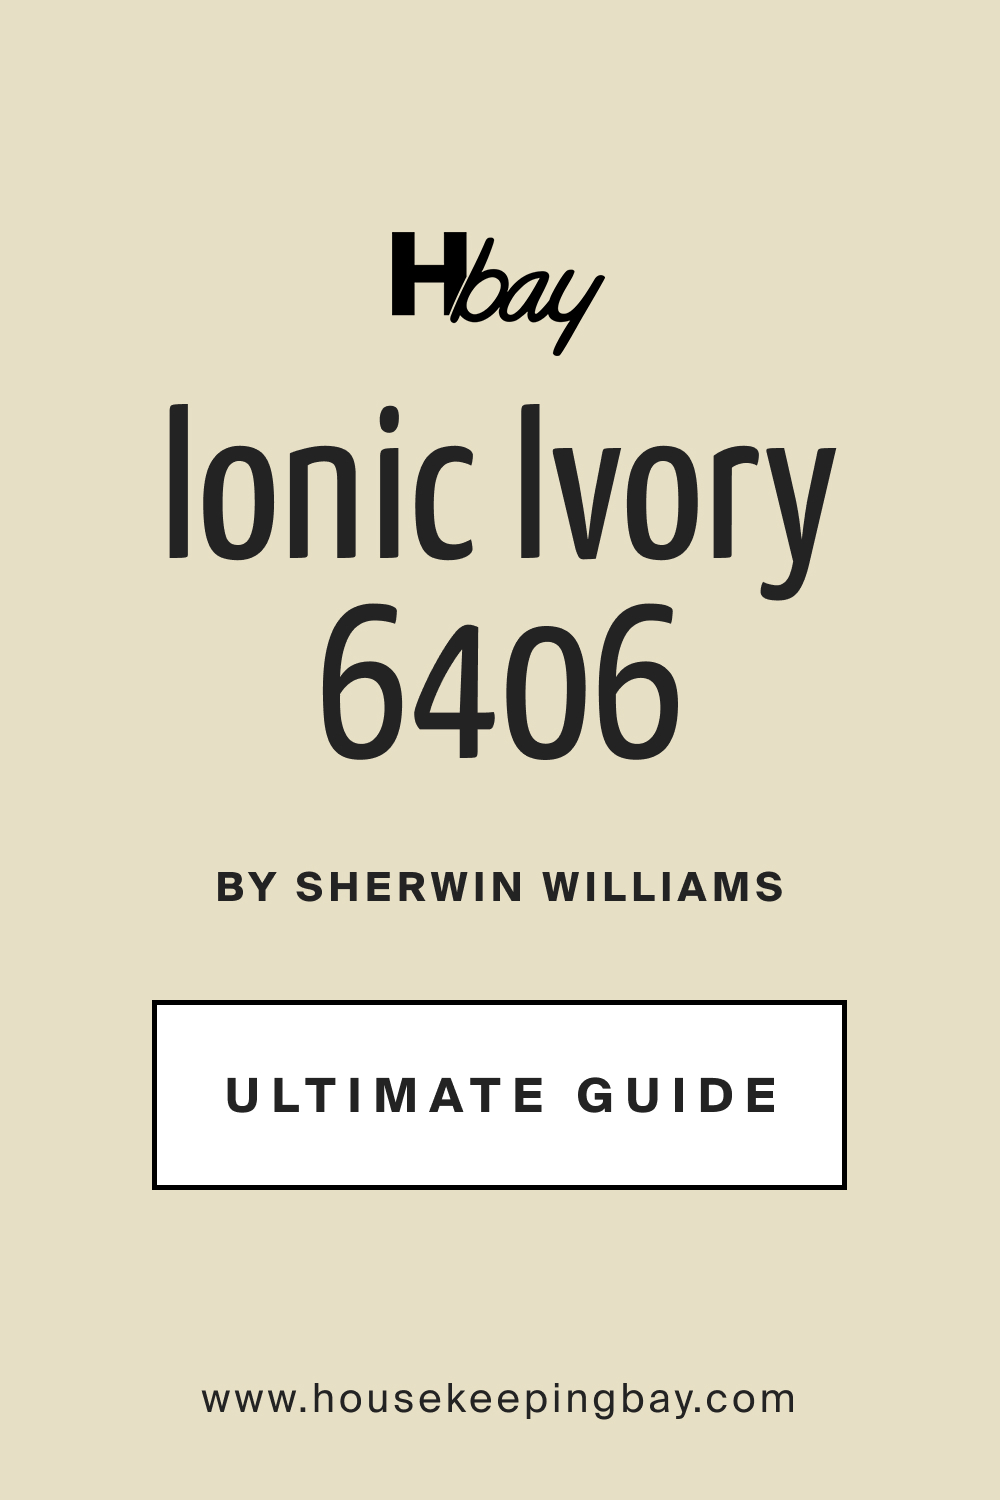 SW 6406 Ionic Ivory by Sherwin Williams Ultimate Guide